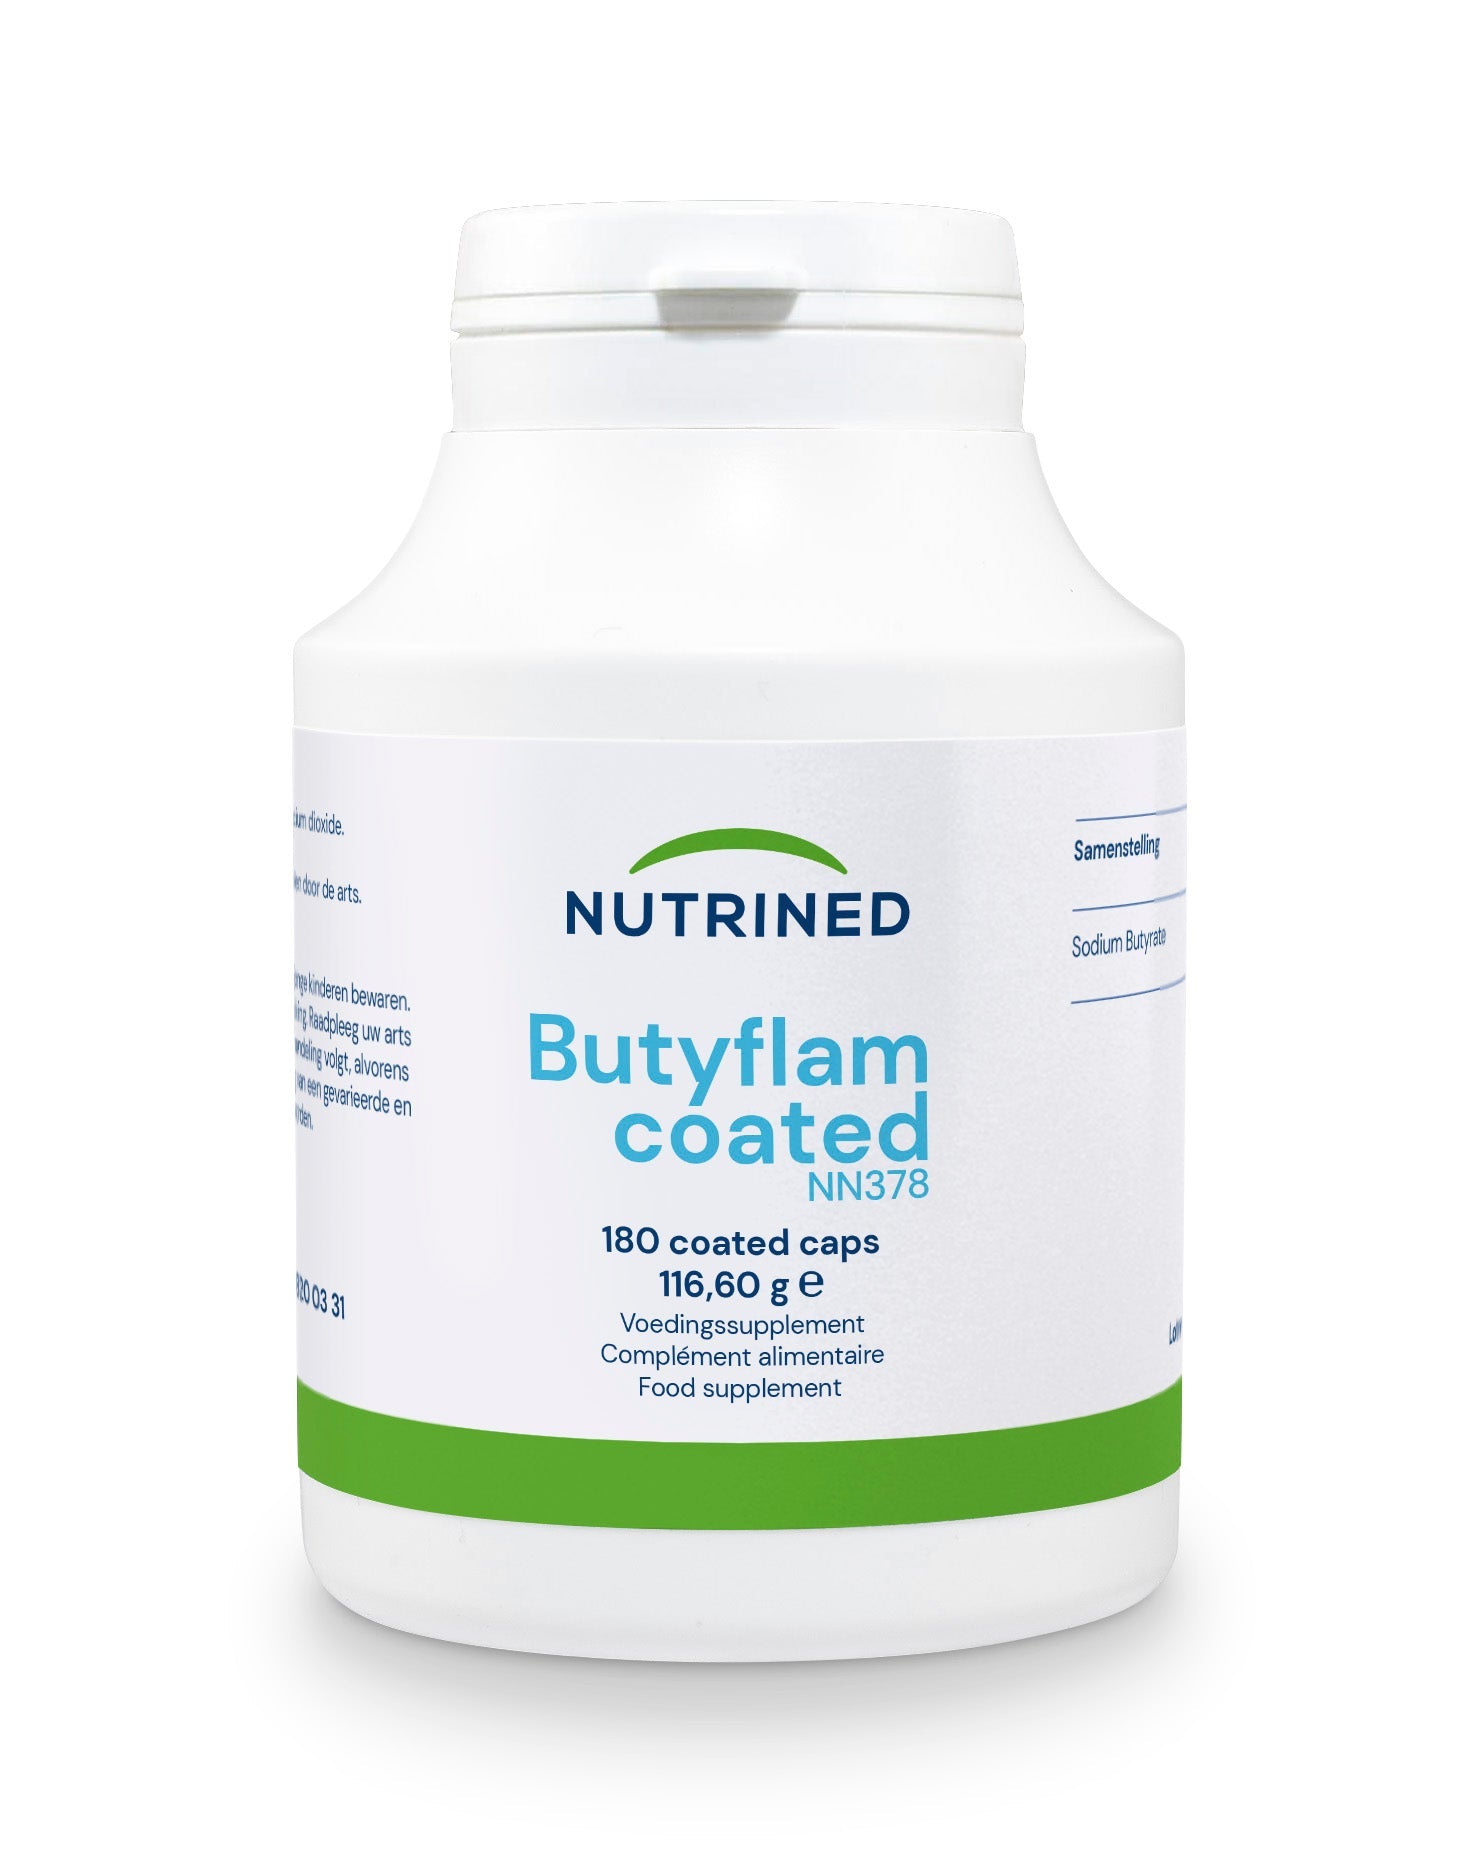 Butyflam Coated - 180 Capsules | Researched Supplements